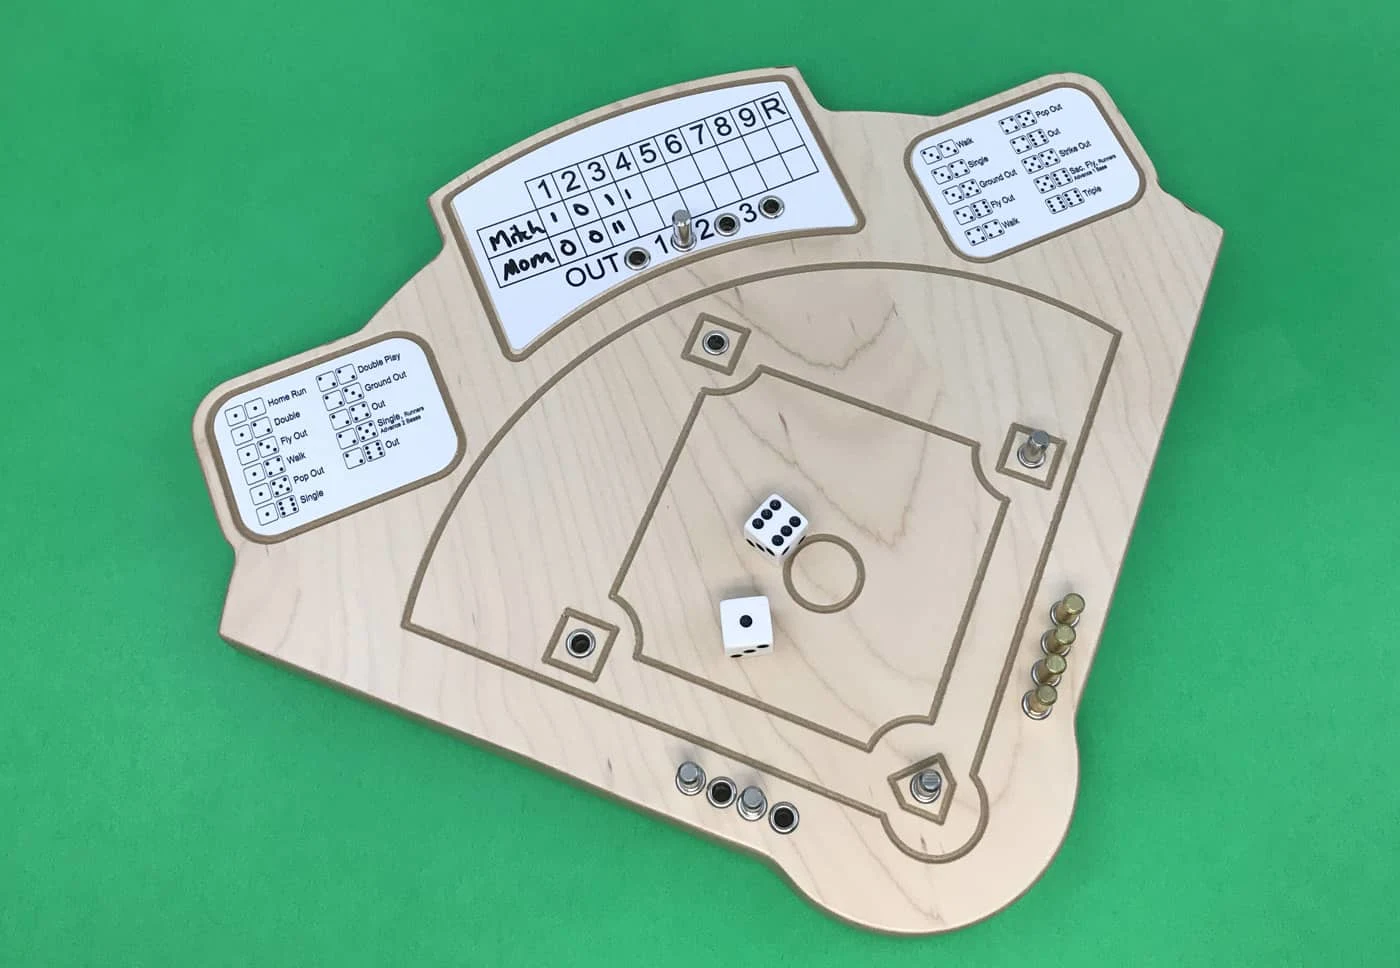 Across the Board baseball dice game with a wooden board